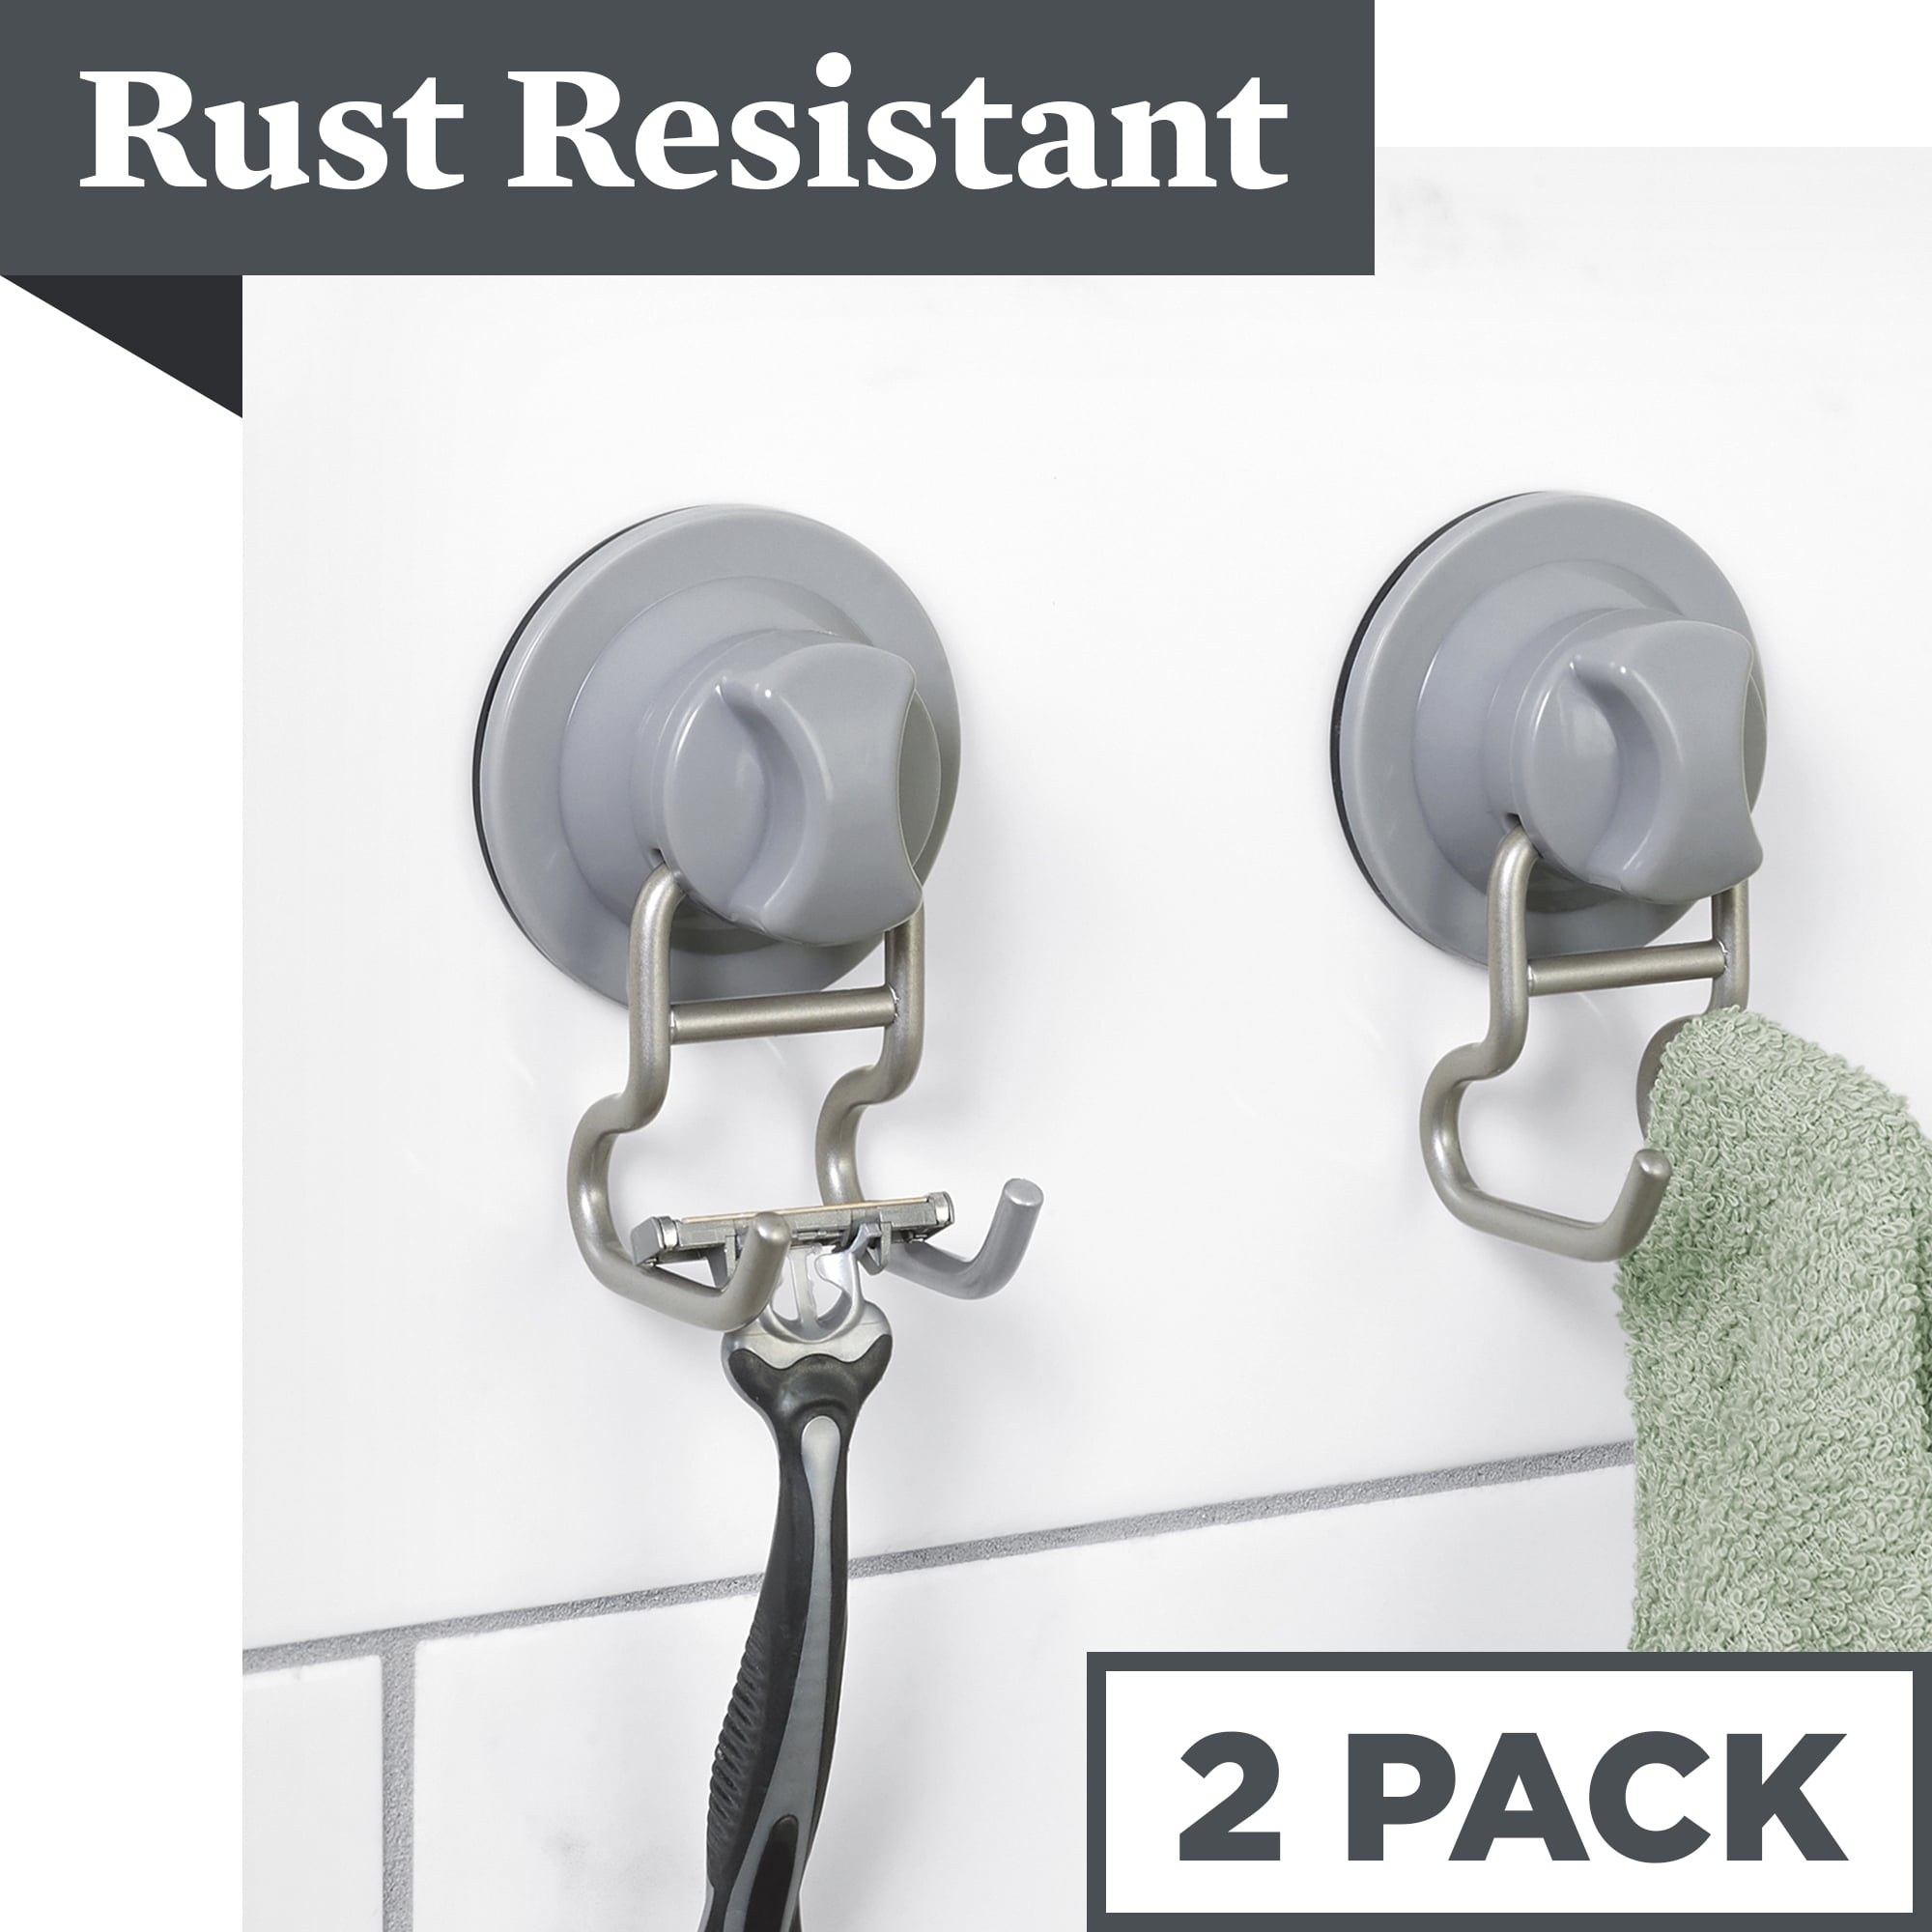 Better Homes & Gardens Dual Hooks, Rust-Resistant, with Power Grip Pro Suction or Adhesive Mount, 2 Pack, Satin Nickel